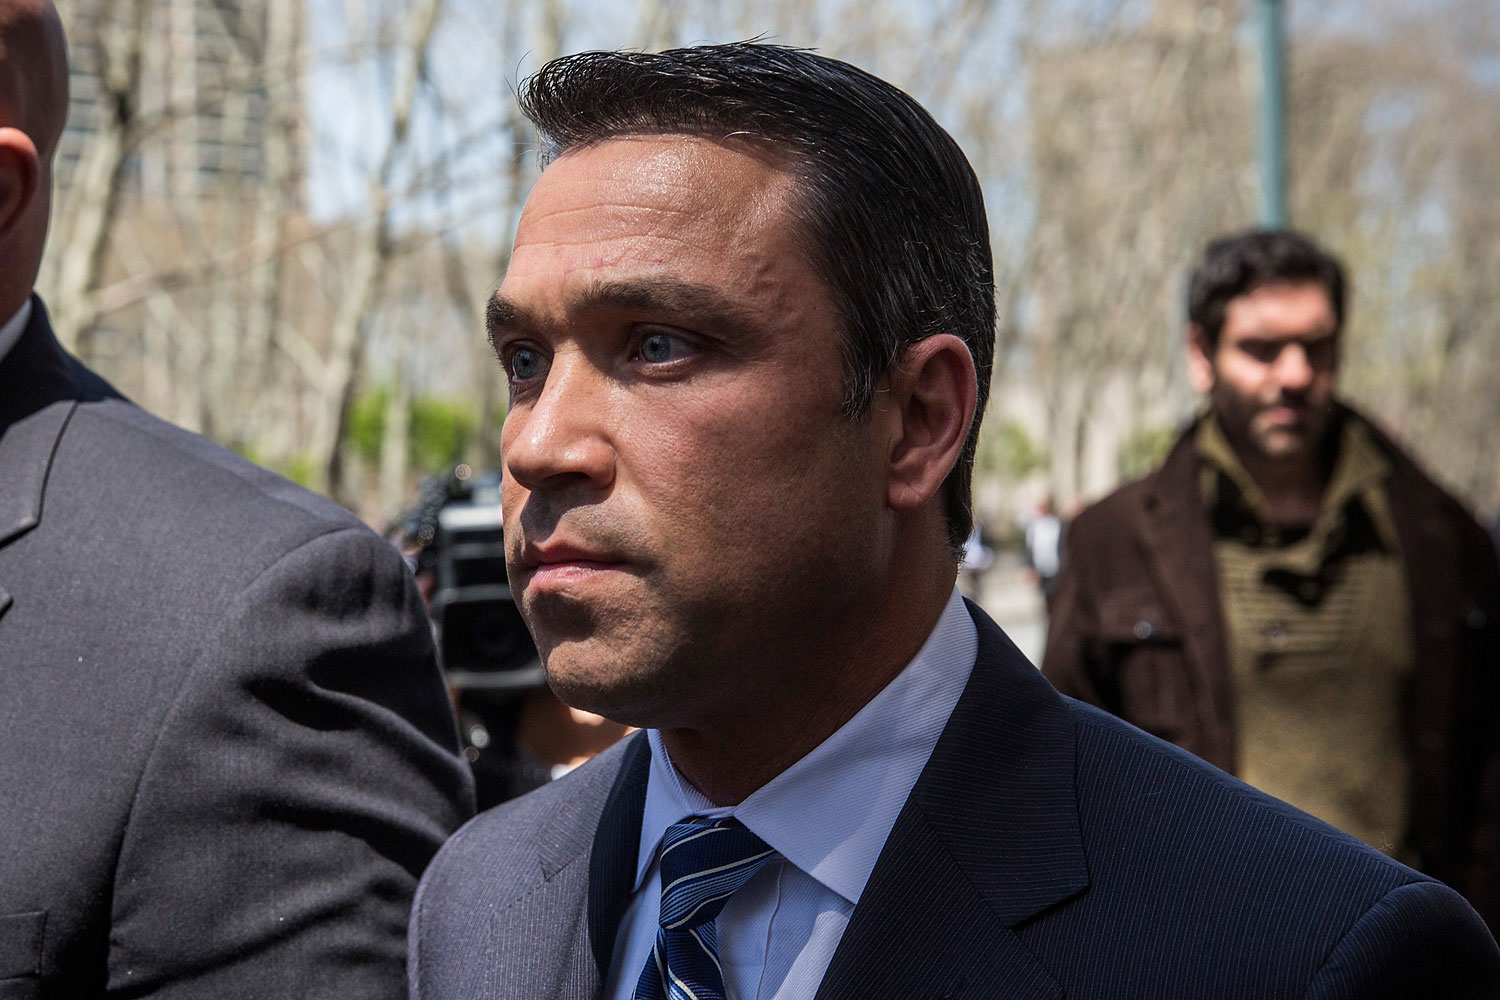 Representative Michael Grimm walks out of Brooklyn Federal Court after being indicted on 20 counts on April 28, 2014 in New York. (Andrew Burton—Getty Images)